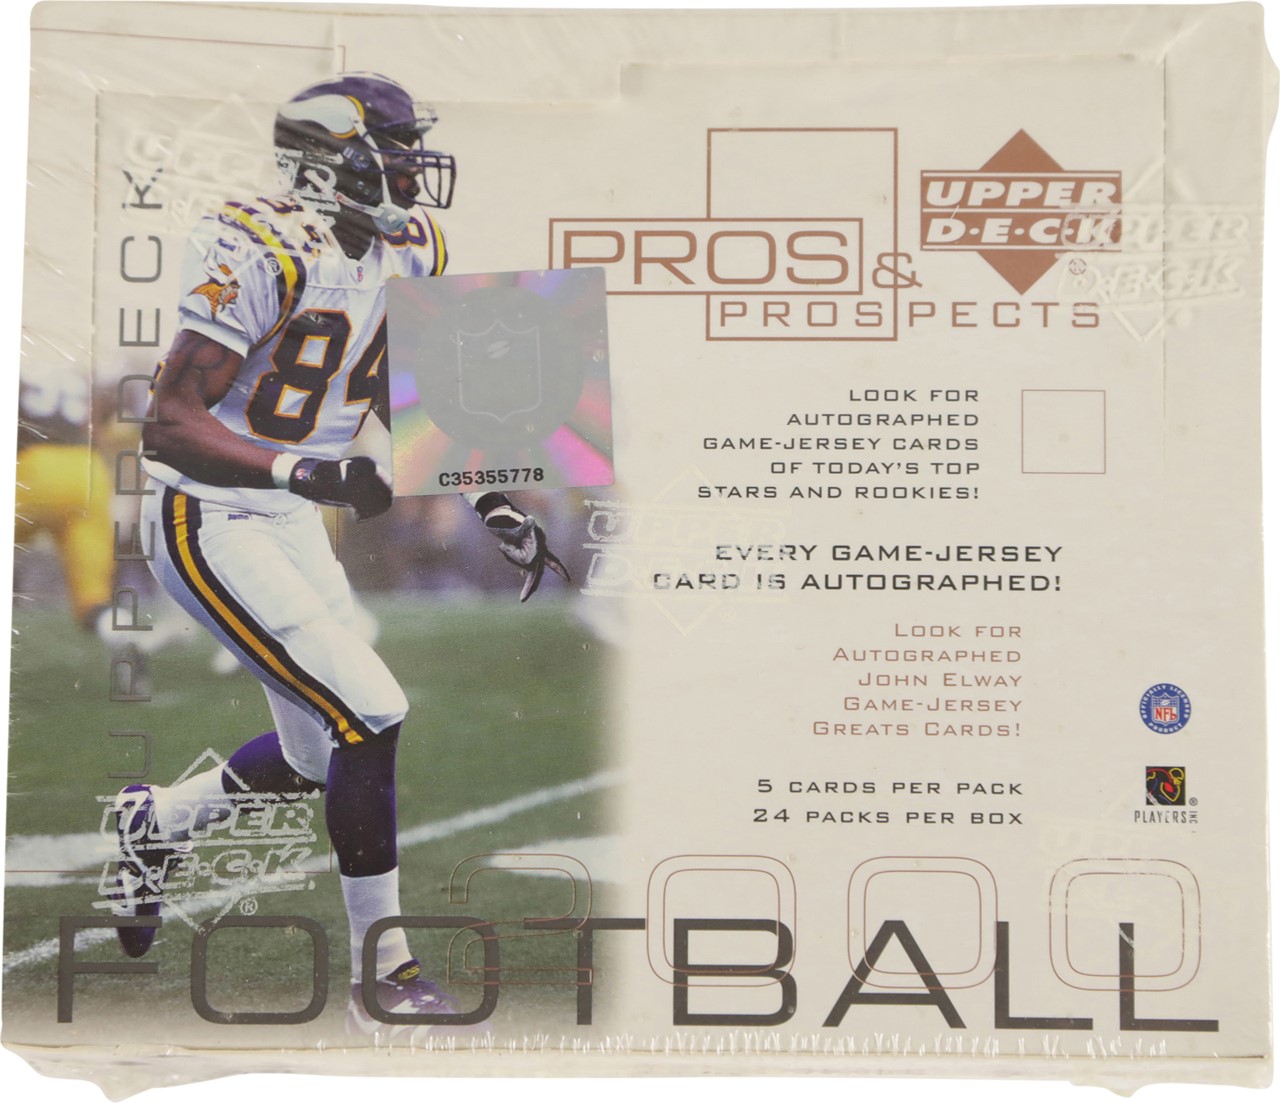 The G.O.A.T Collection - 2000 UD Pros & Prospects Football Factory Sealed Hobby Box - Tom Brady Rookie Year